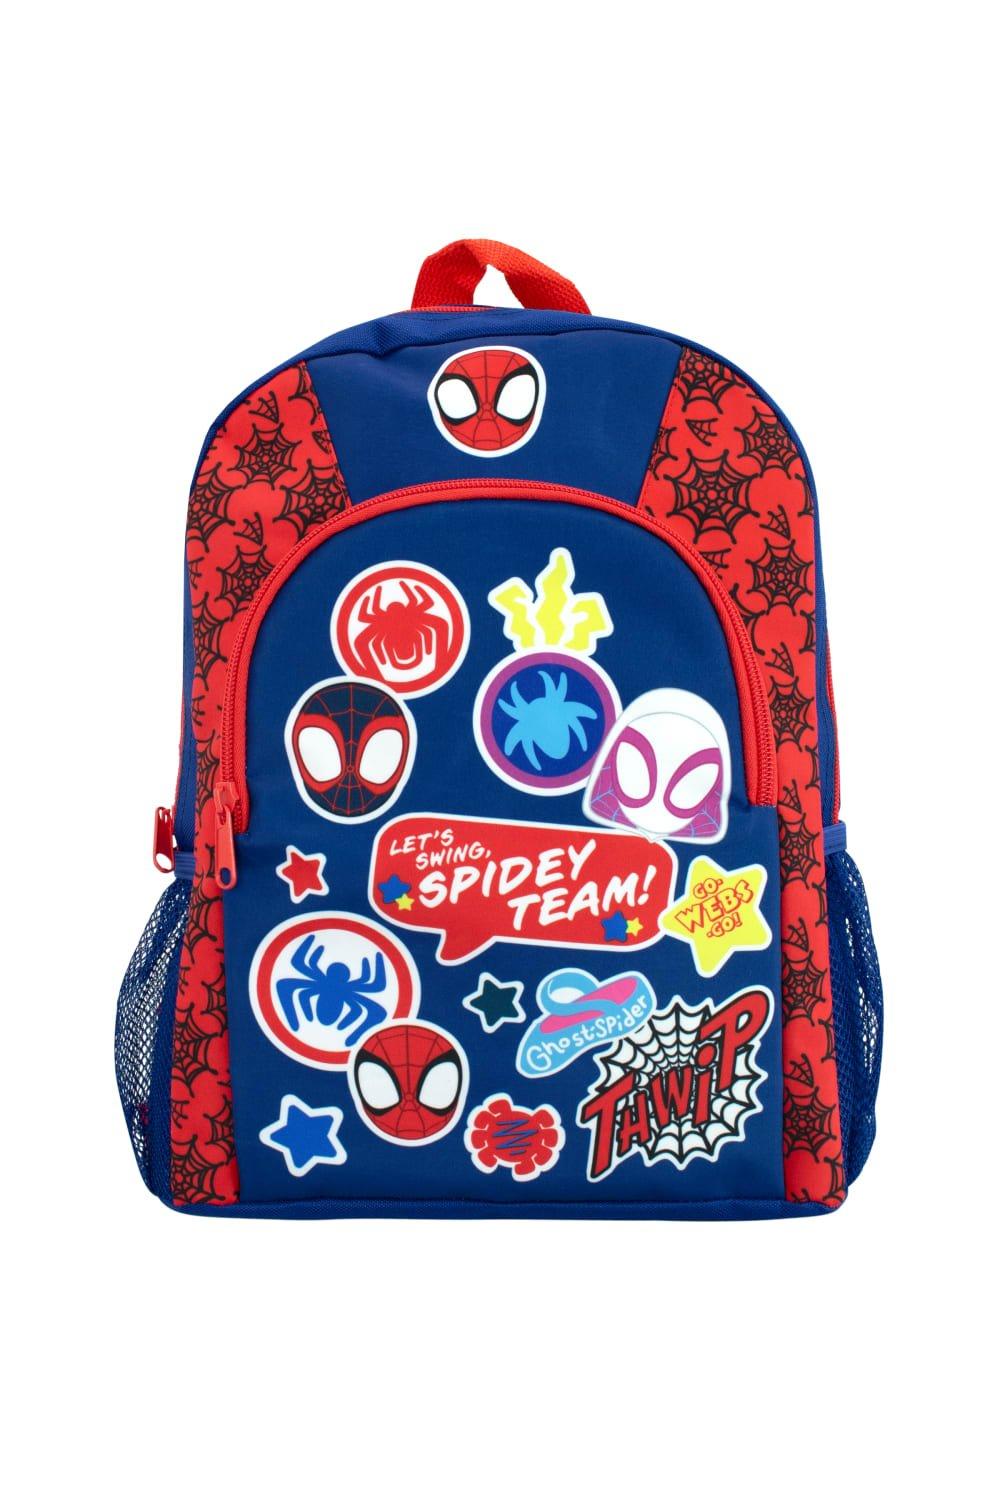 Spidey and His Amazing Friends Backpack